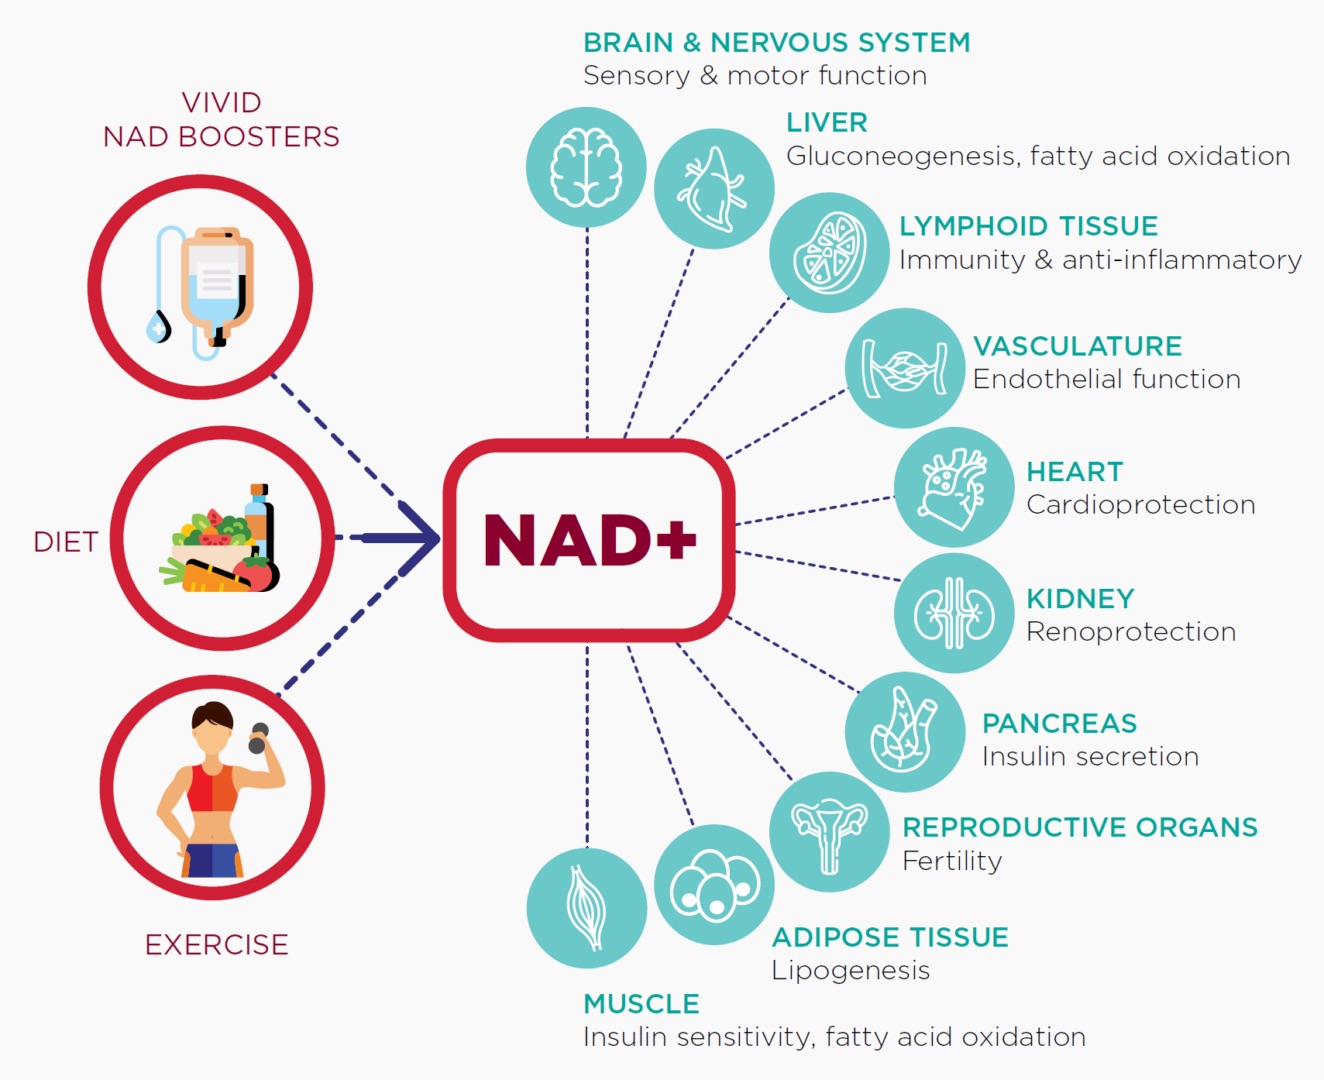 nad iv therapy